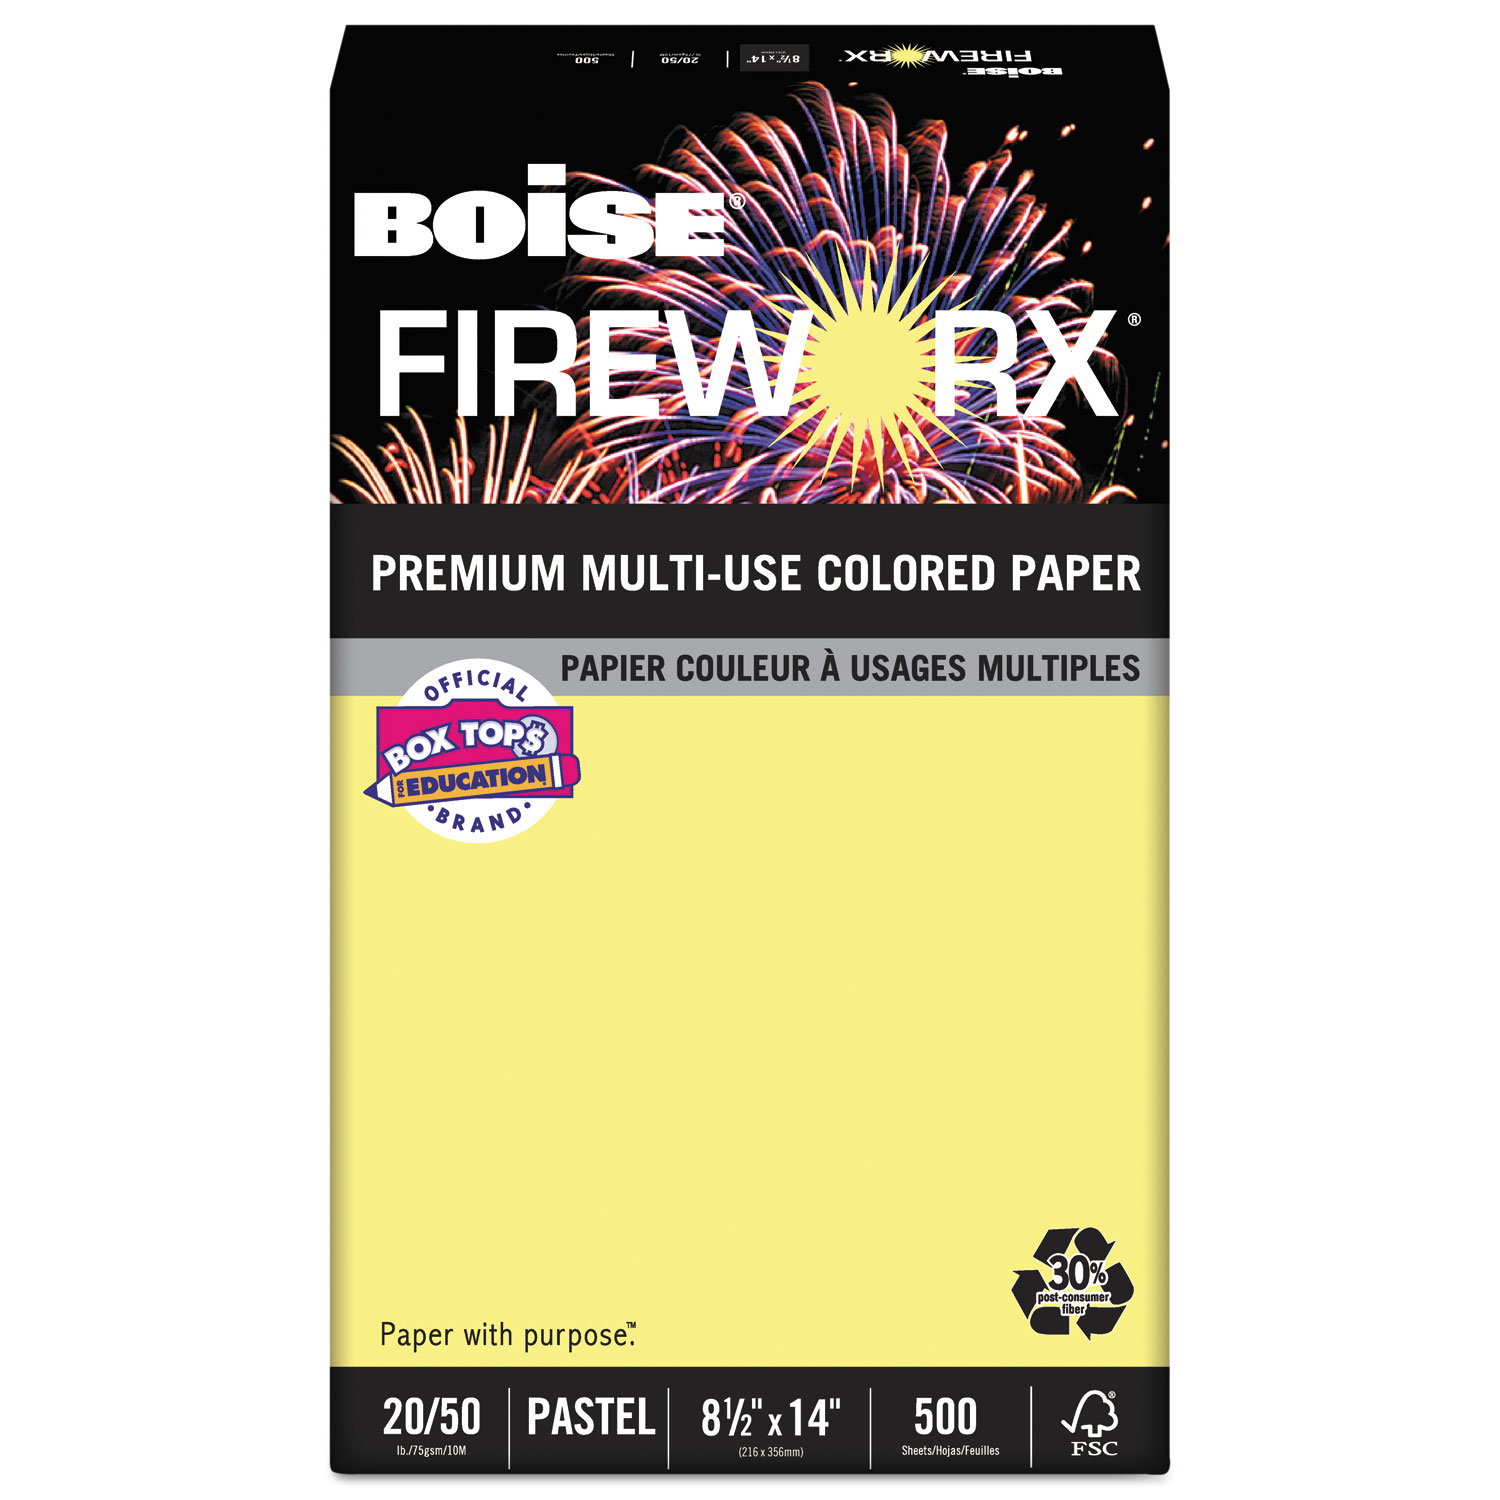 FIREWORX Colored Paper, 20lb, 8-1/2 x 14, Crackling Canary, 500 Sheets/Ream